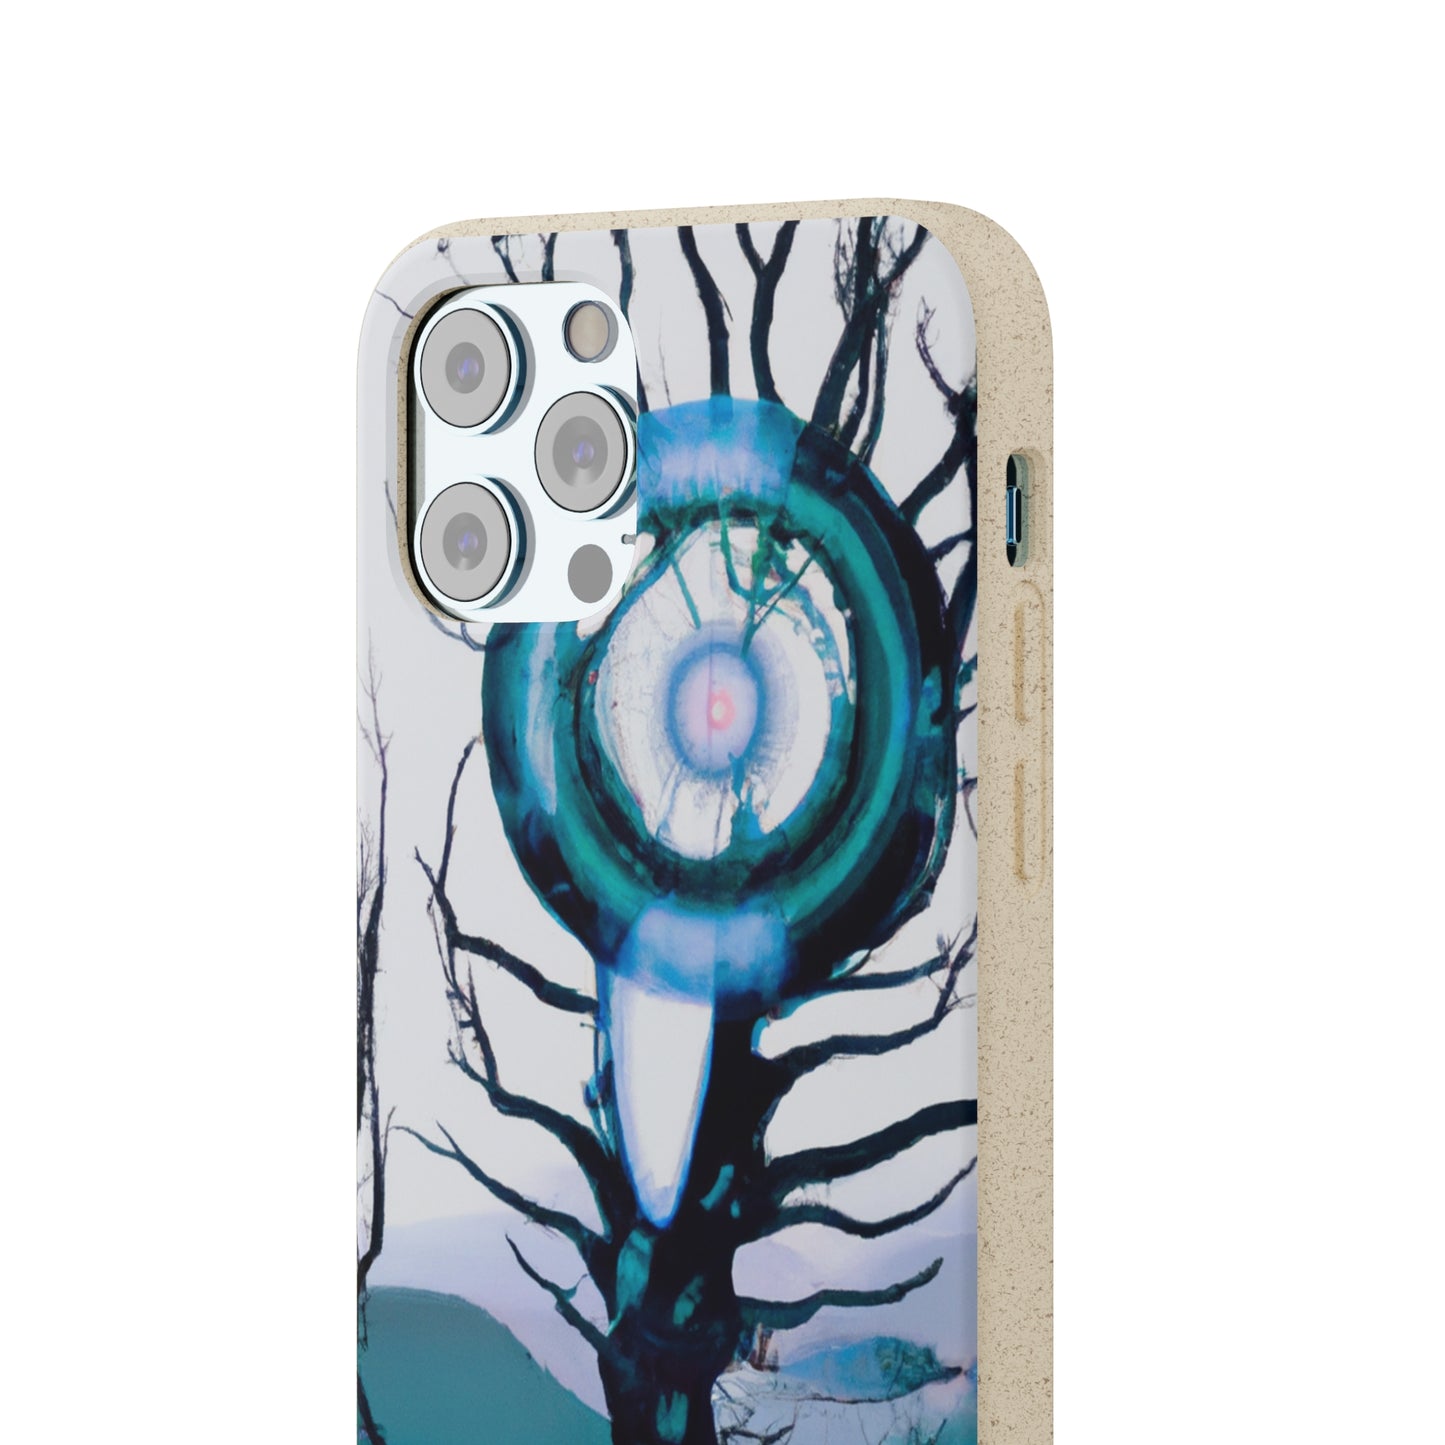 "Nature Meets Technology: A Creative Exploration" - Bam Boo! Lifestyle Eco-friendly Cases